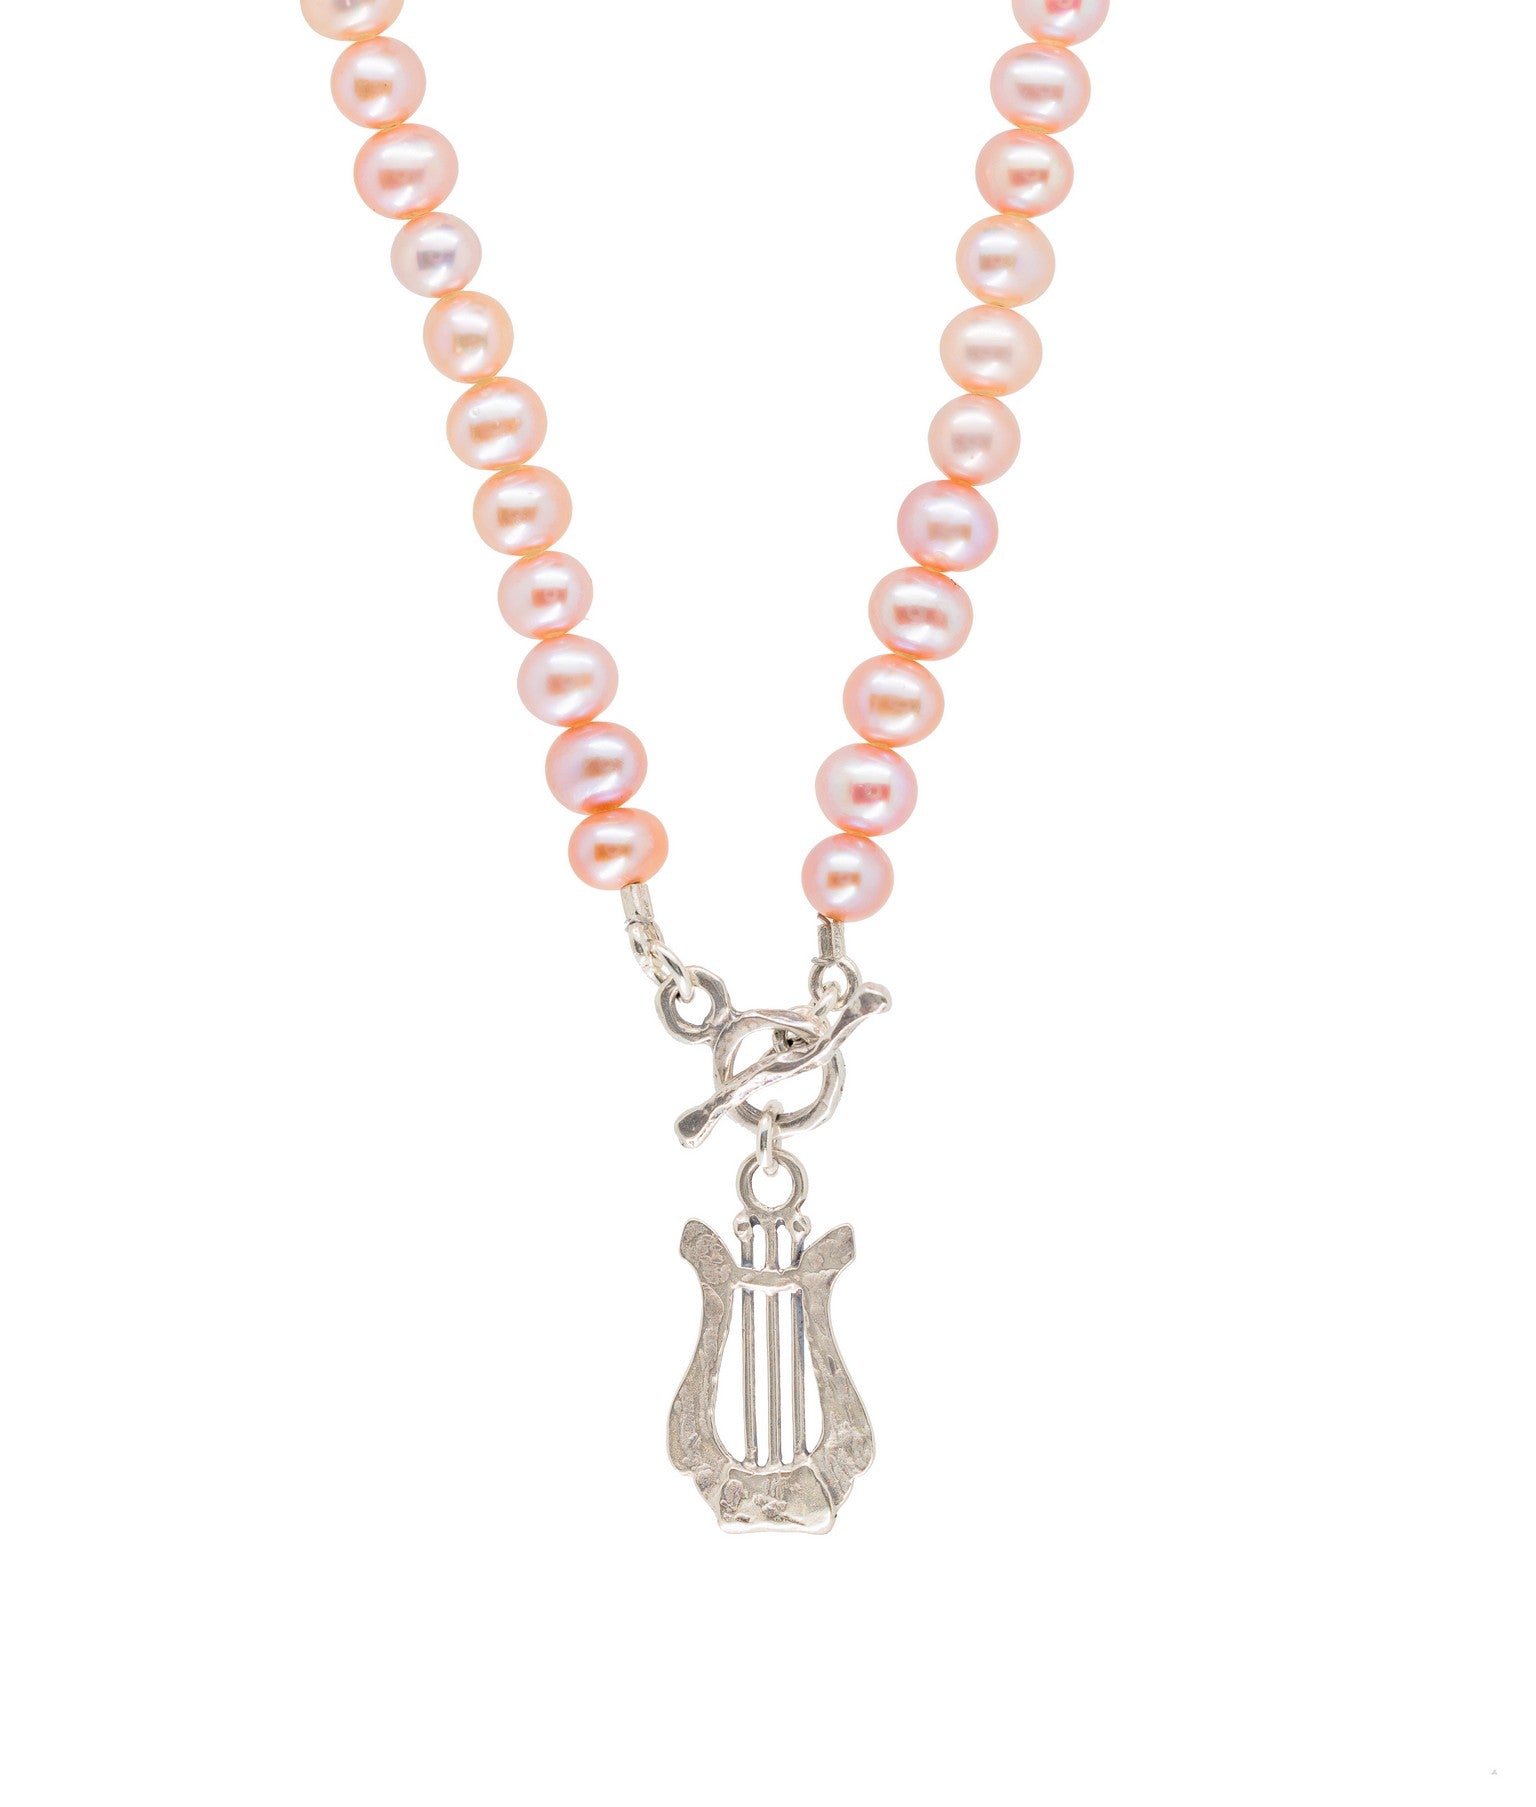 David's Harp PINK PEARL Necklace.